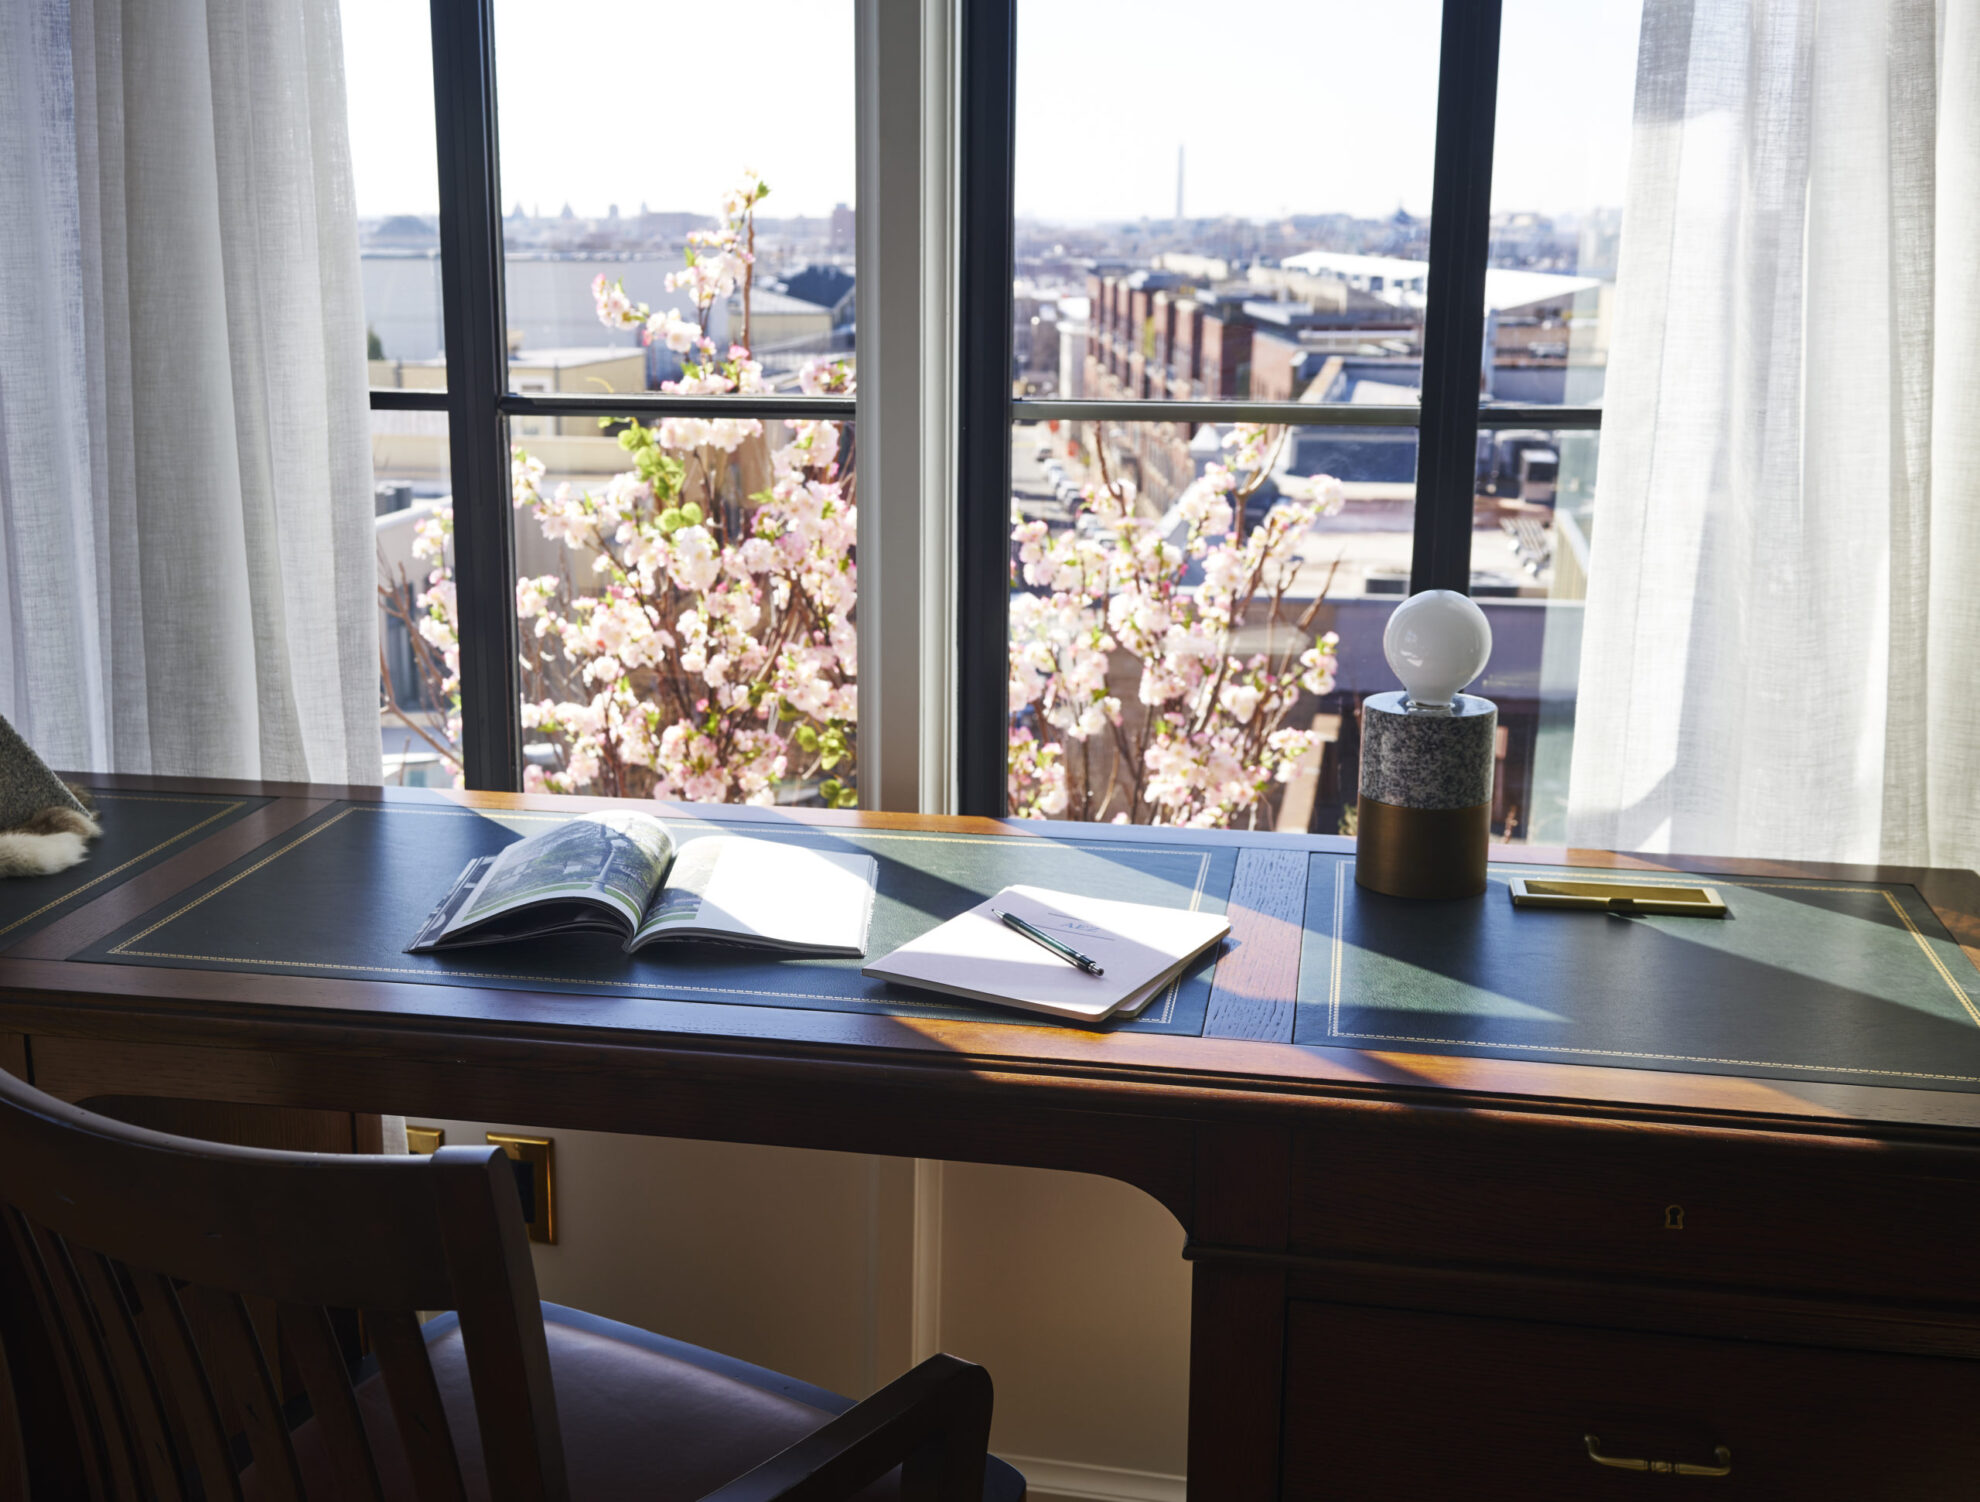 Picture of a study table with books and lamp on it along with city view from the window